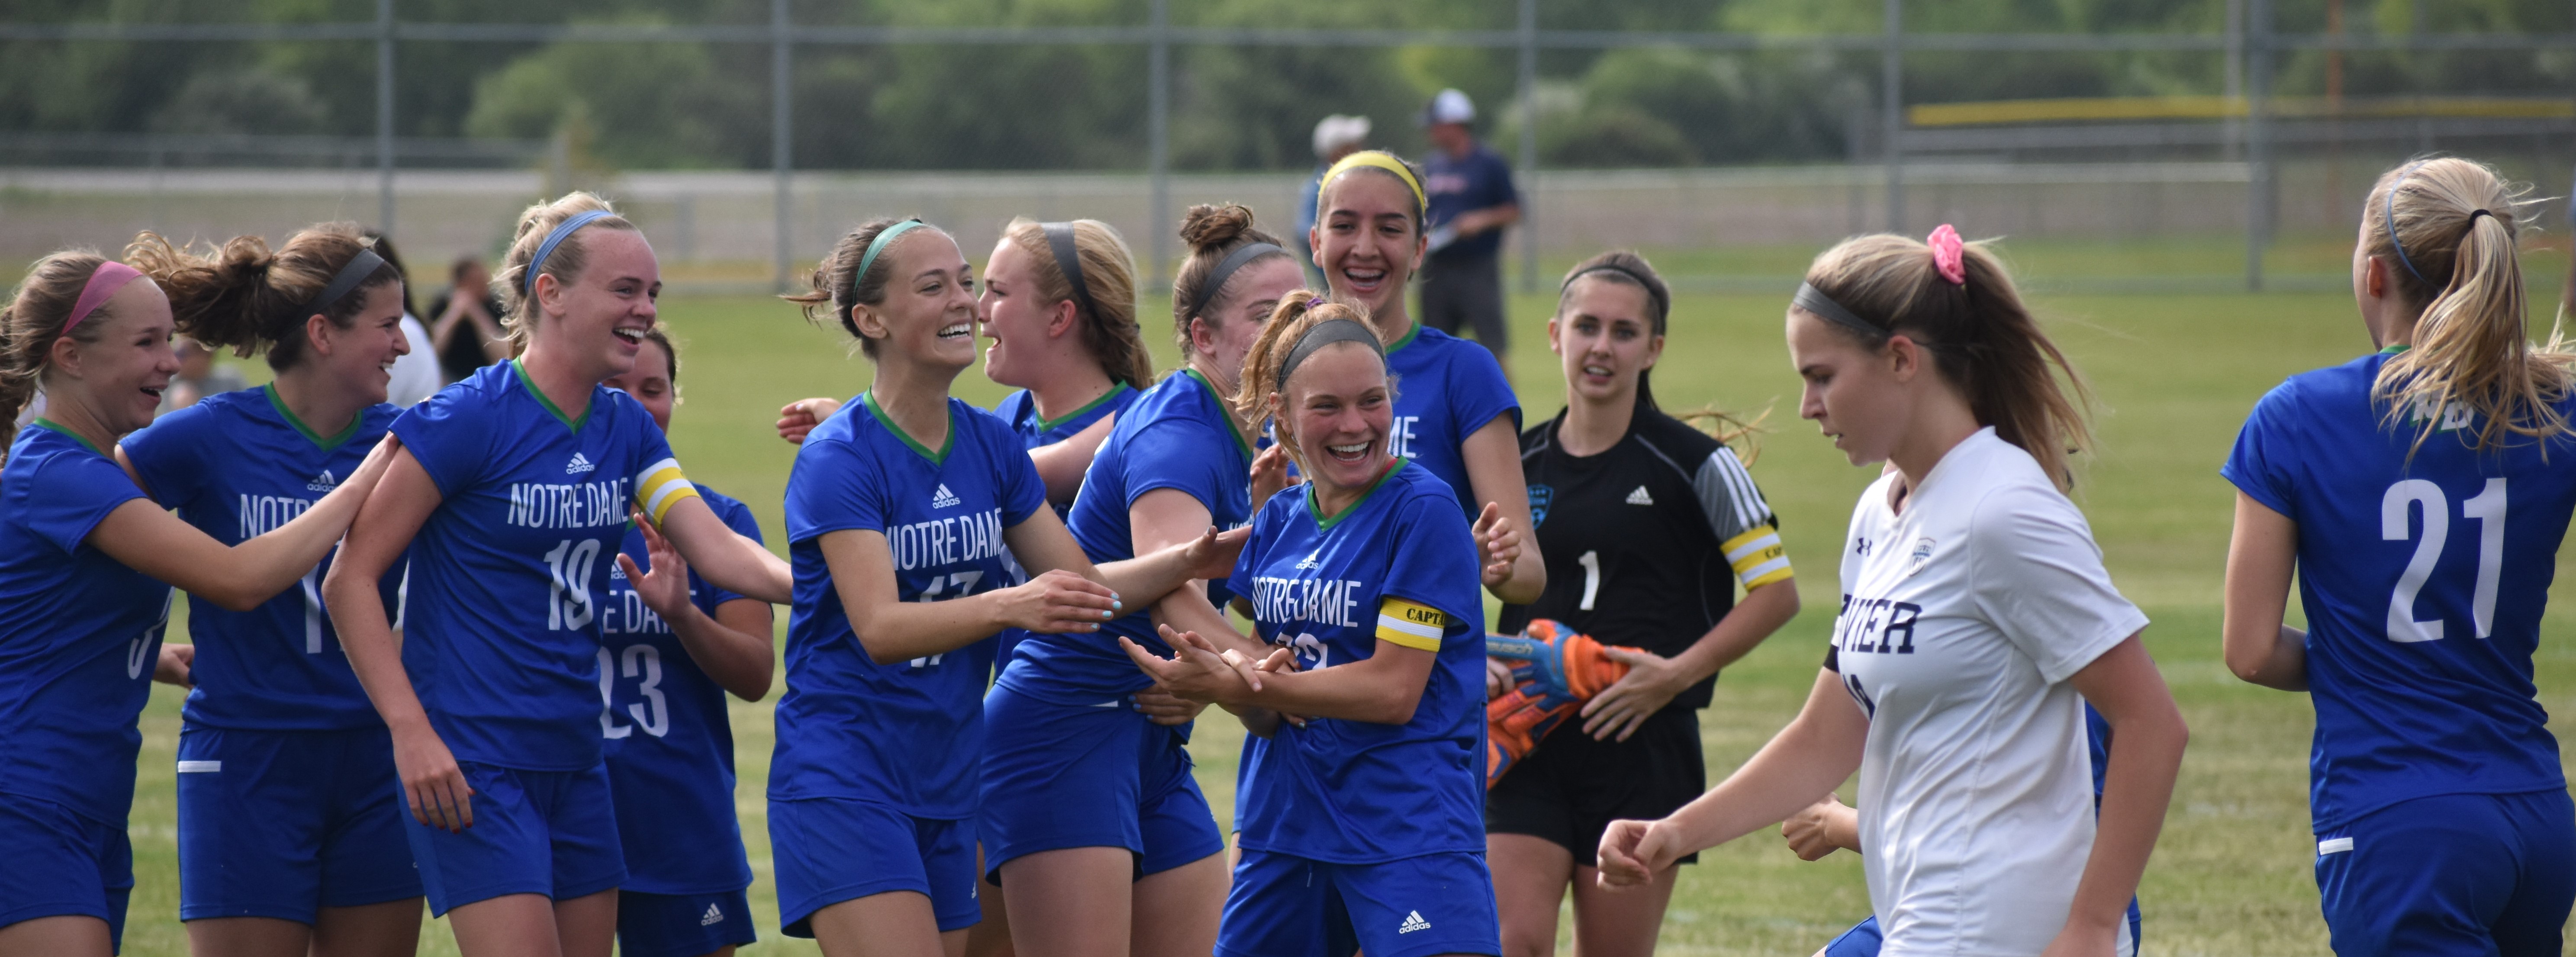 Notre Dame state soccer preview; Quidzinski leads off the field